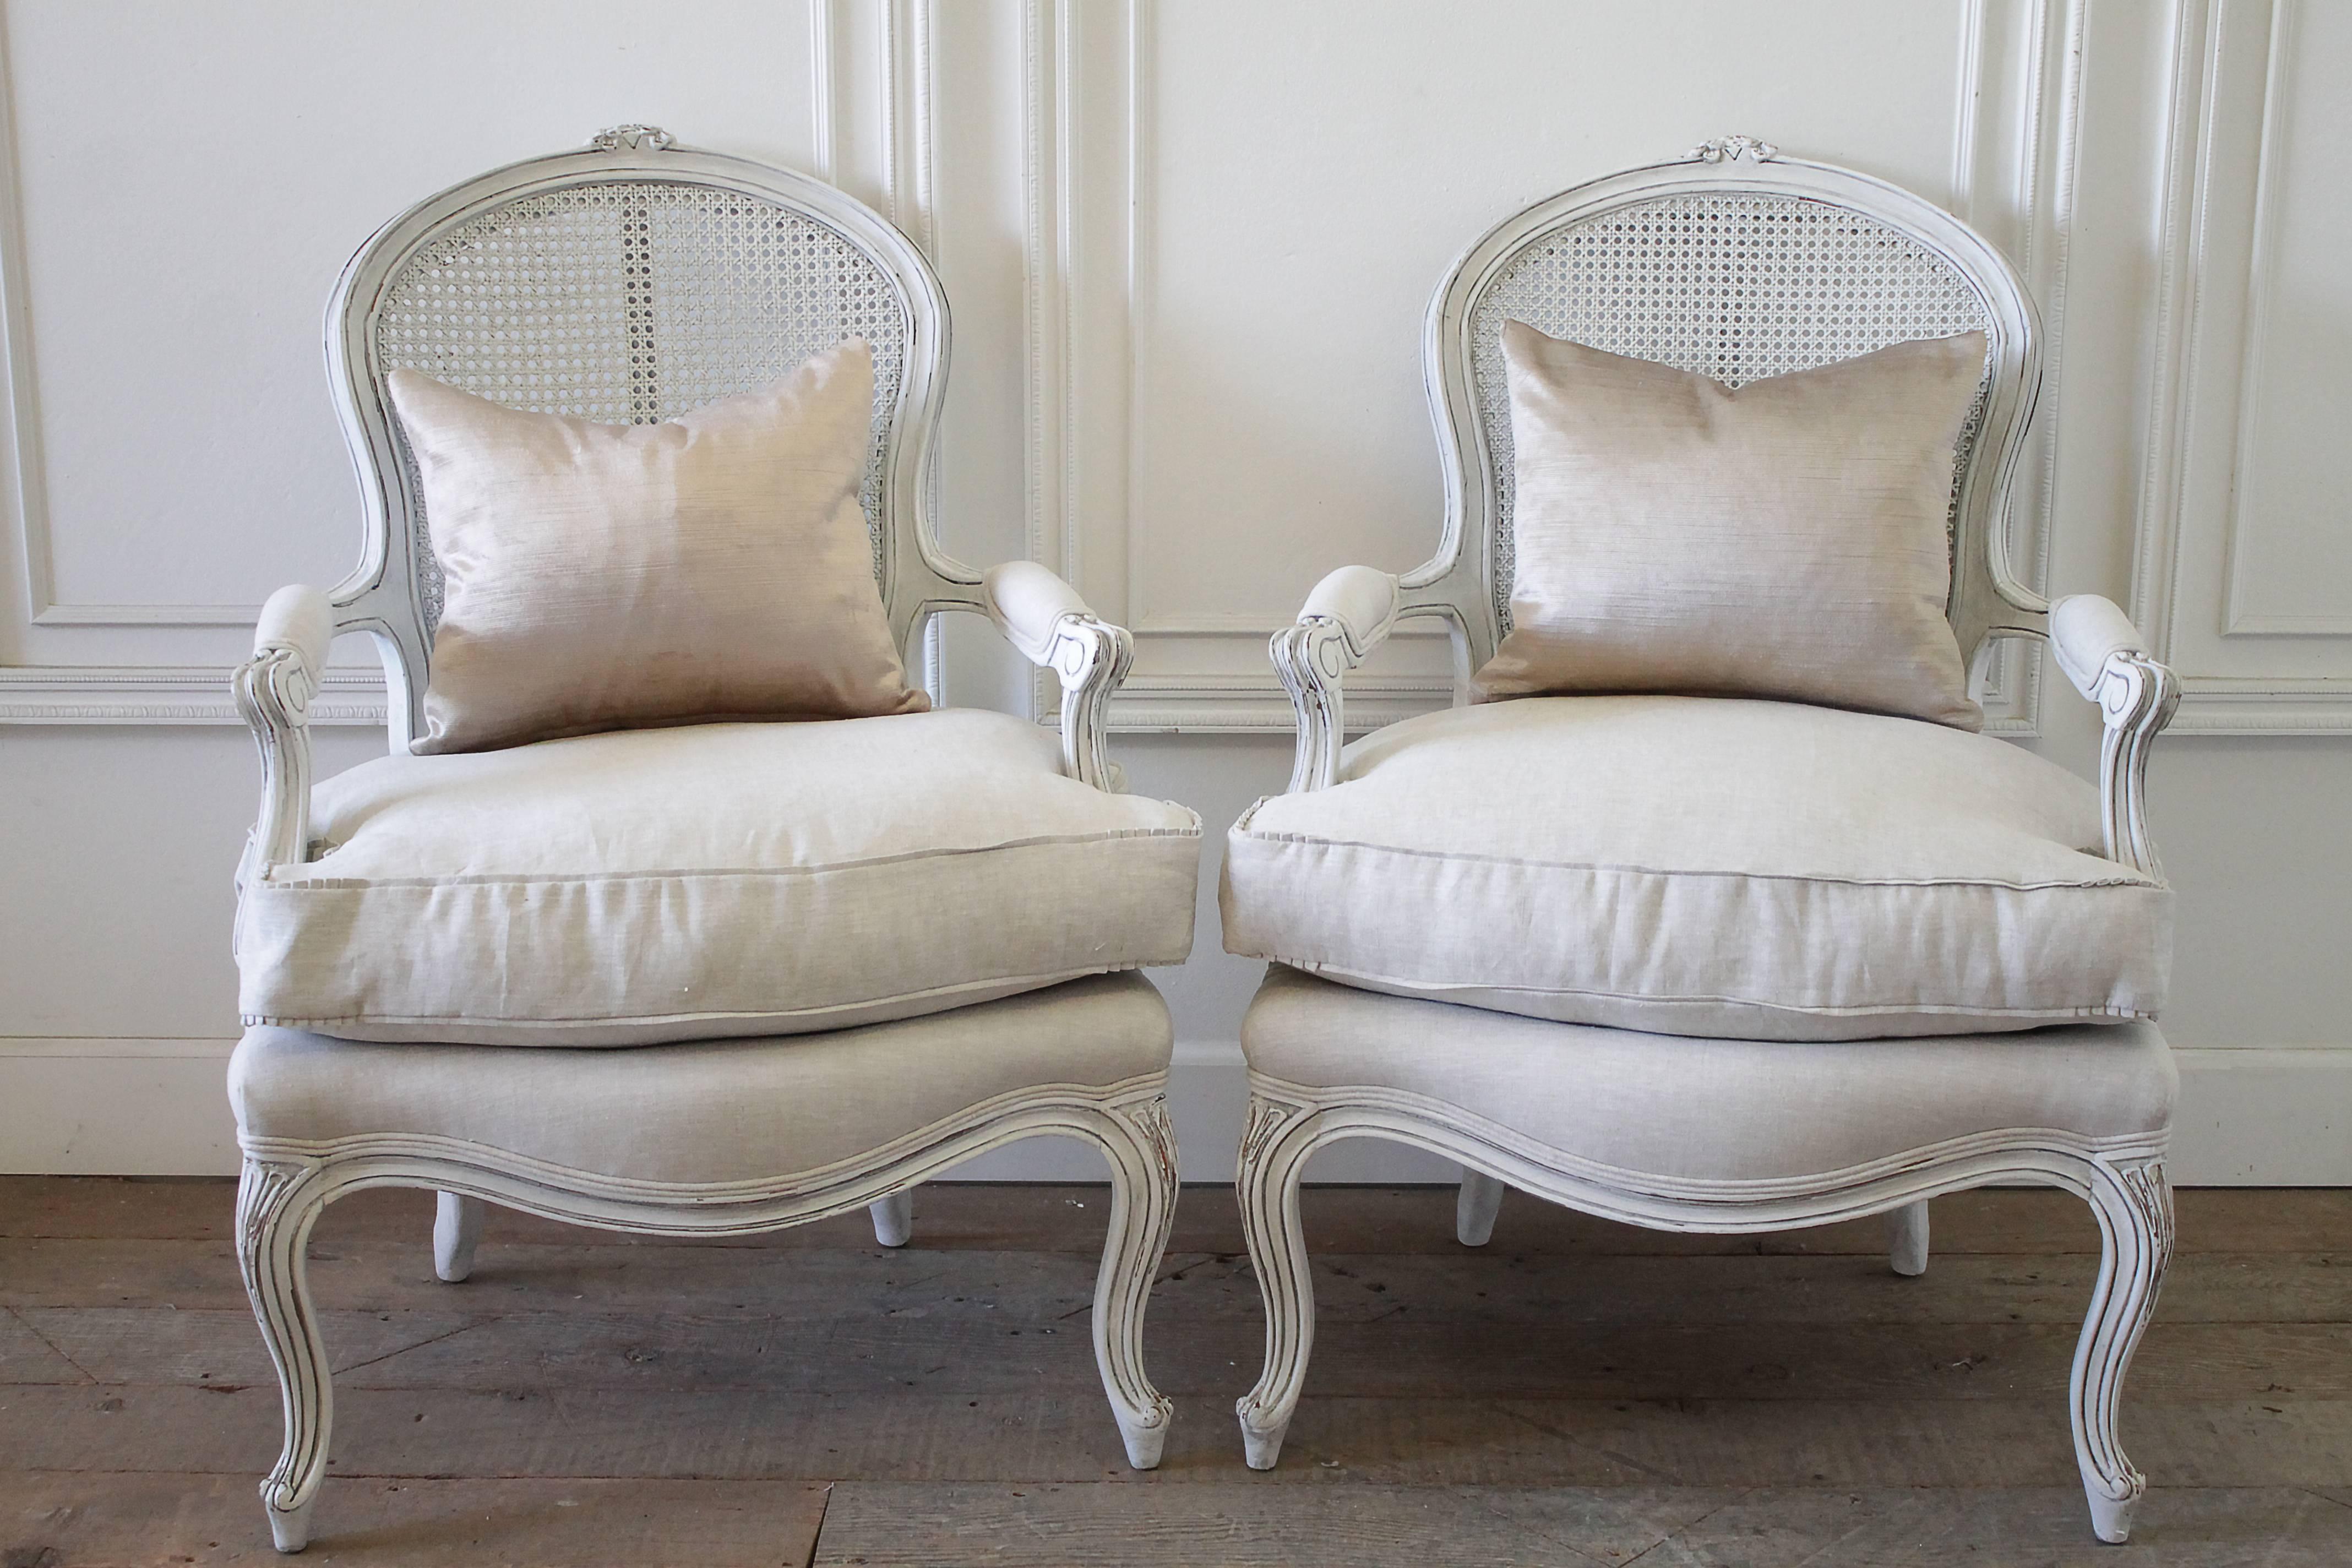 Pair of midcentury painted cane French style chairs
Painted in an oyster white finish, with subtle areas of distressing and hand applied antique glaze.
New upholstery in organic natural Belgian linen, with pleated ruffle slip covered cushions. New